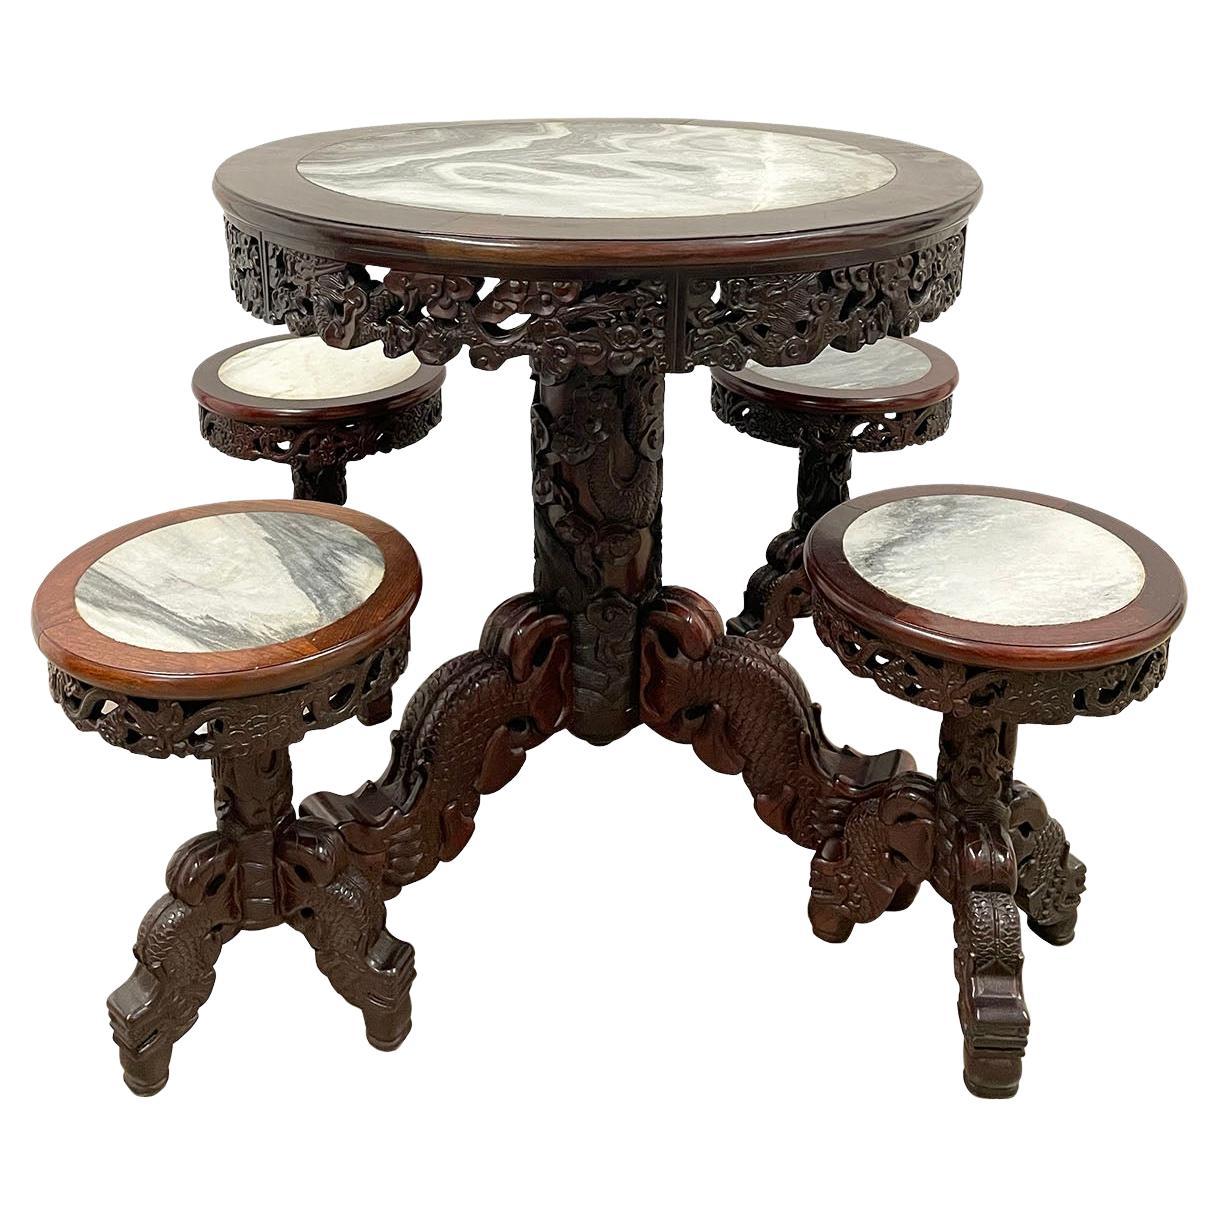 20 Century Chinese Marble Top Hardwood Carved Round Dinning Table Set